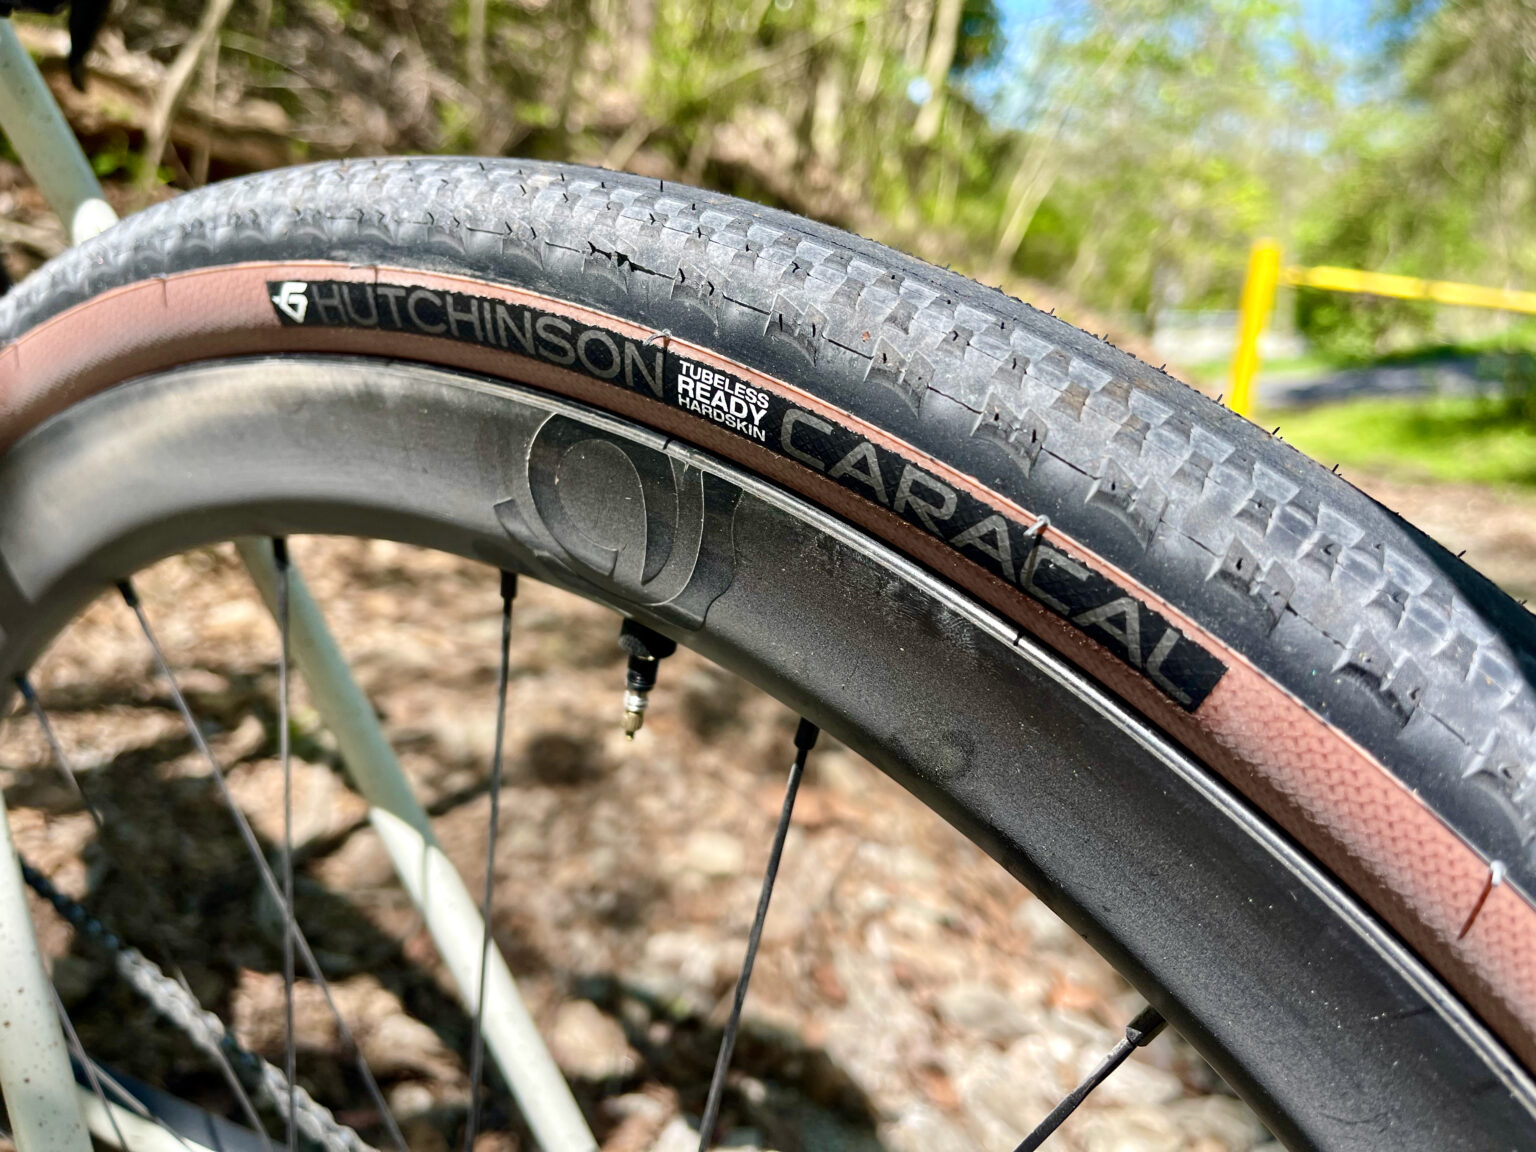 Hutchinson Caracal gravel tire side out